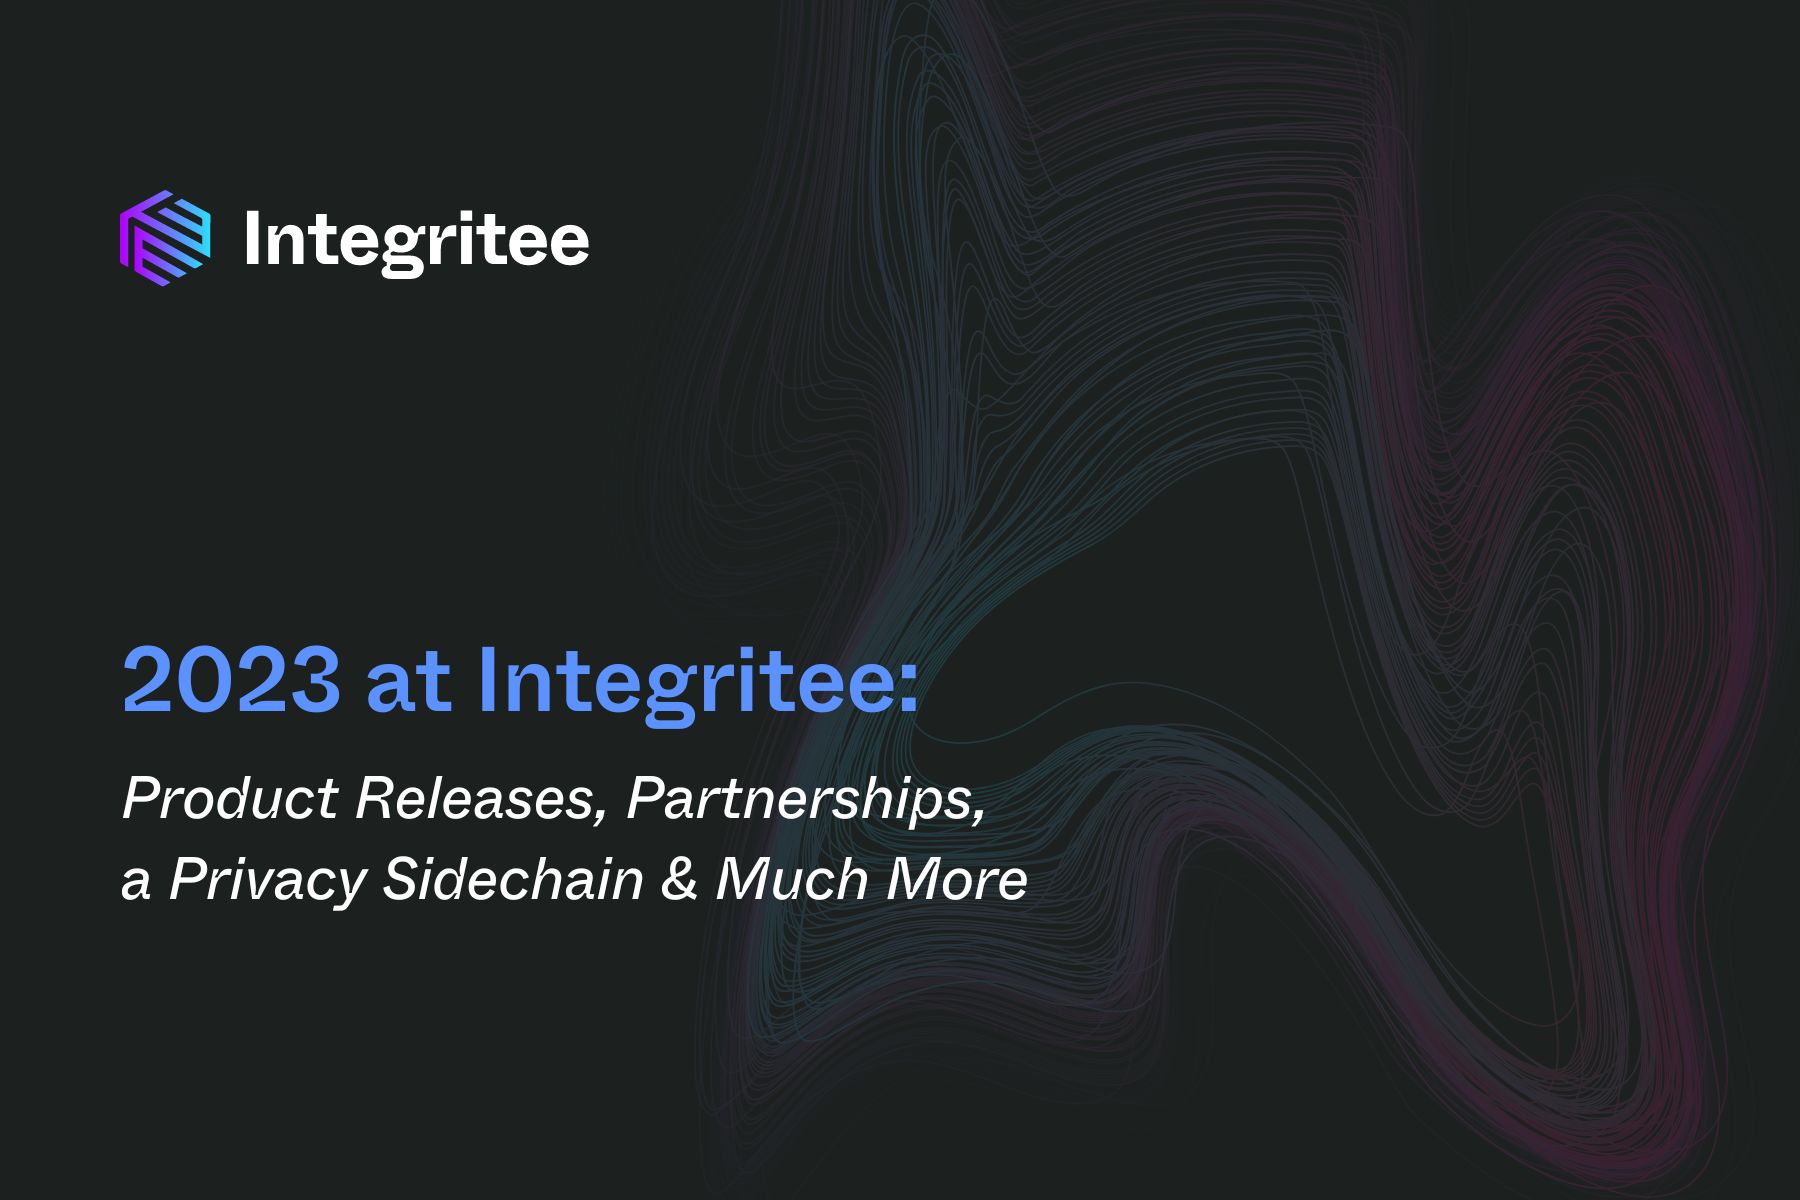 2023 at Integritee: Product Releases, Partnerships, a Privacy Sidechain & Much More